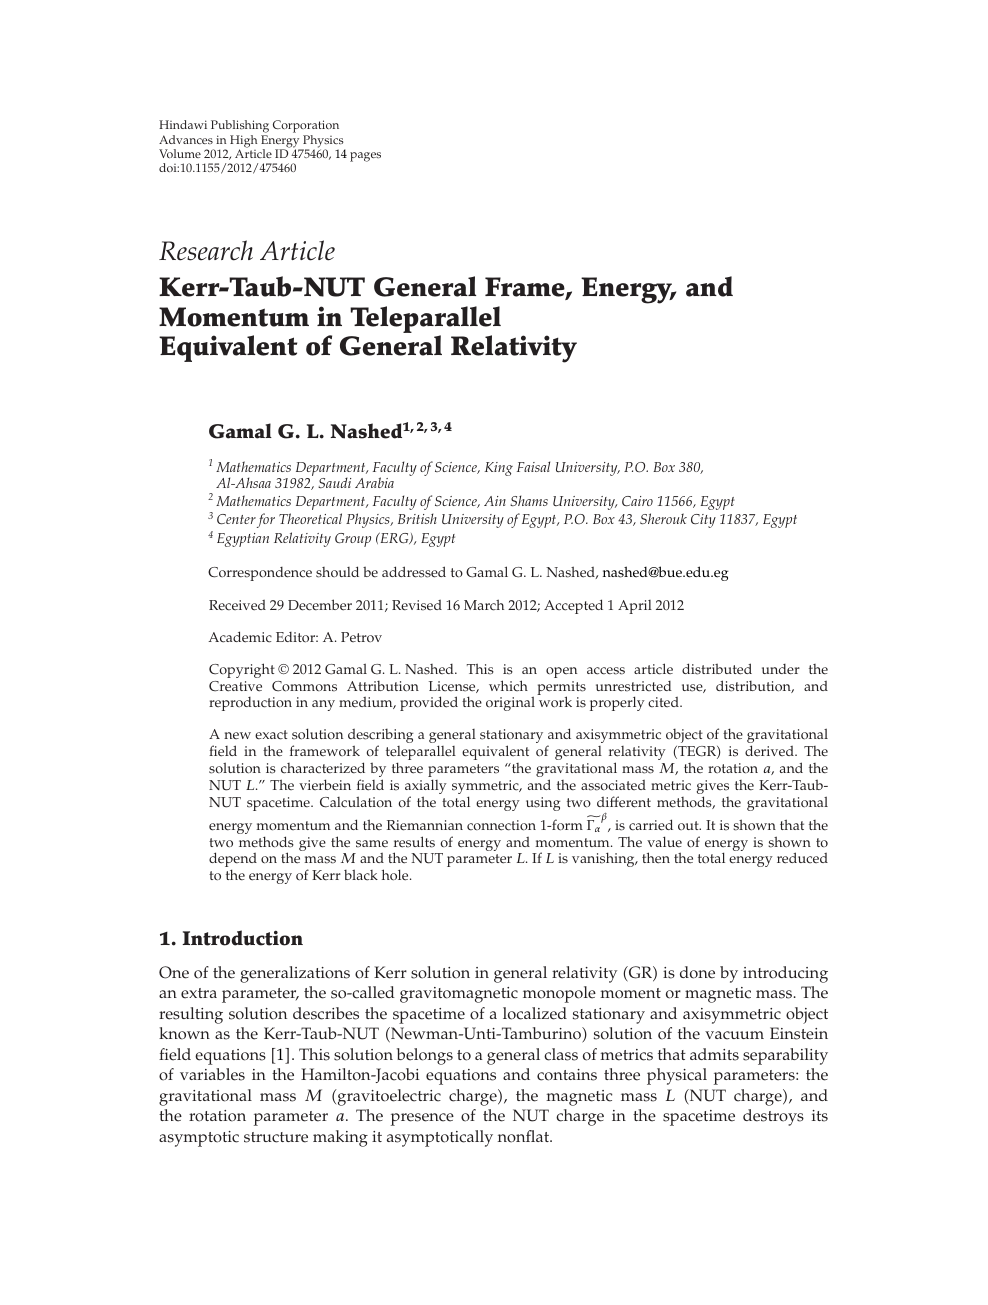 Kerr Taub Nut General Frame Energy And Momentum In Teleparallel Equivalent Of General Relativity Topic Of Research Paper In Physical Sciences Download Scholarly Article Pdf And Read For Free On Cyberleninka Open Science